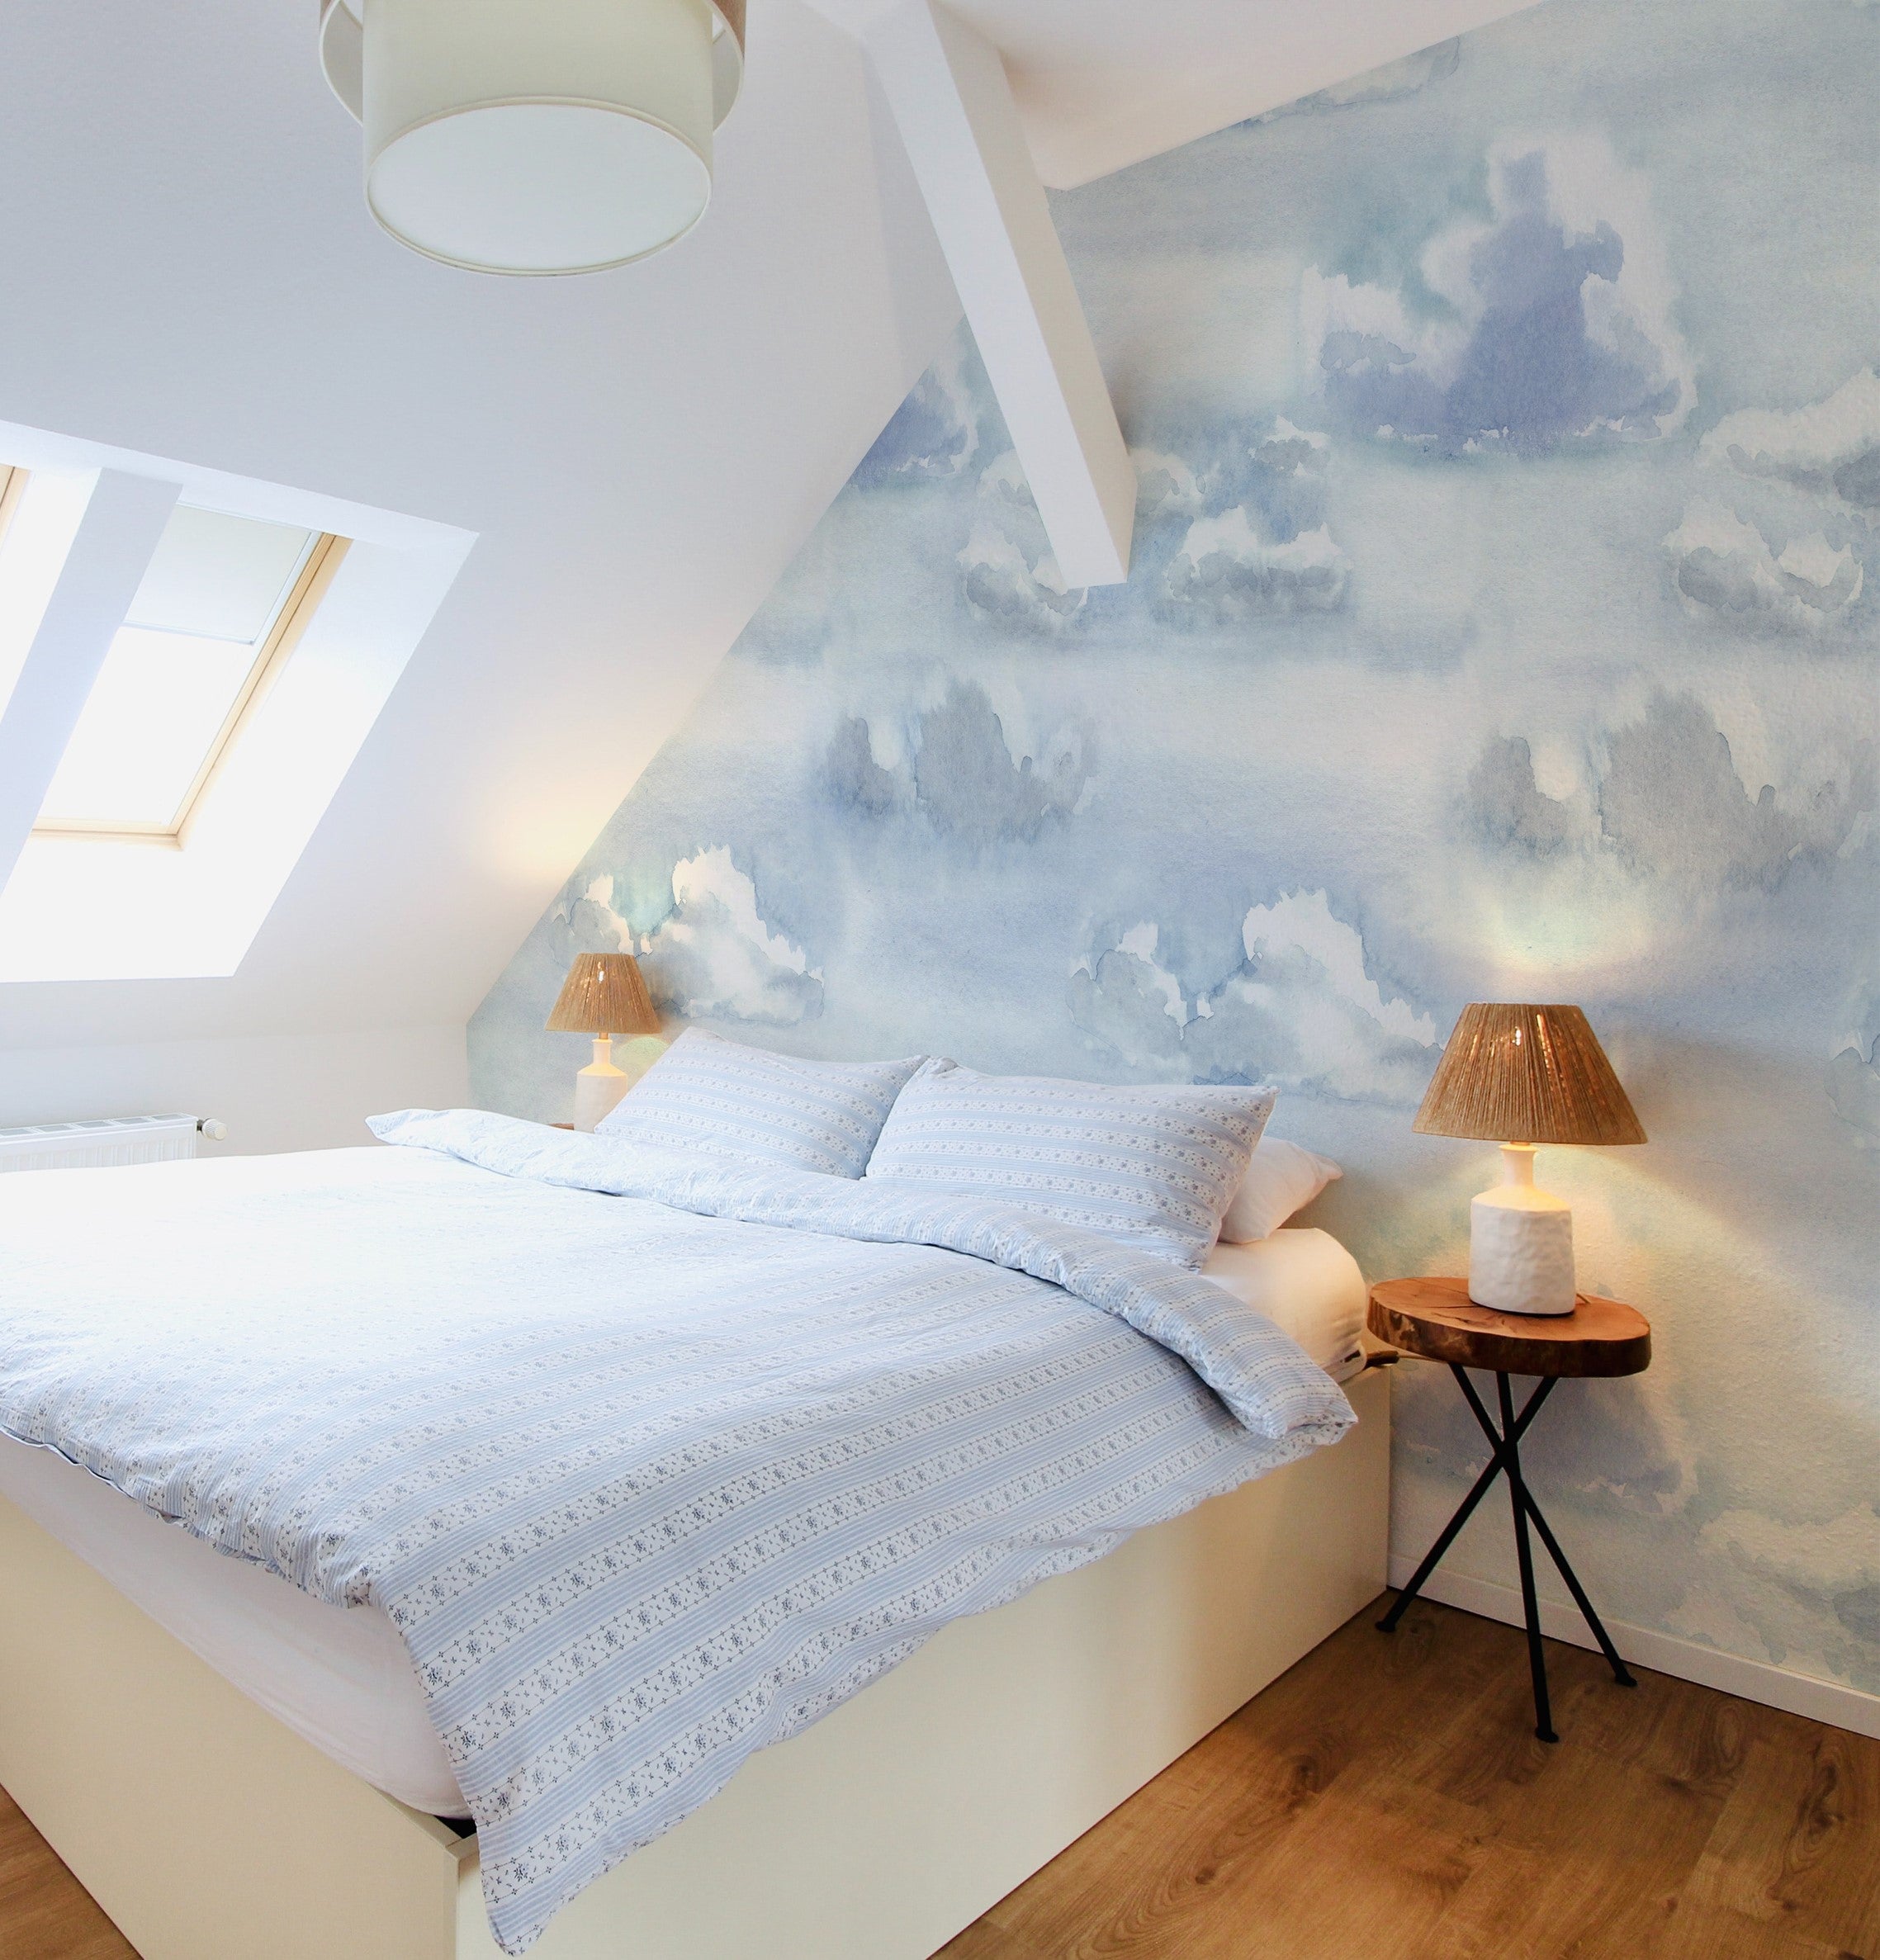 Wallpaper Trends of 2023: Transform Your Bedroom Into a Happy Place